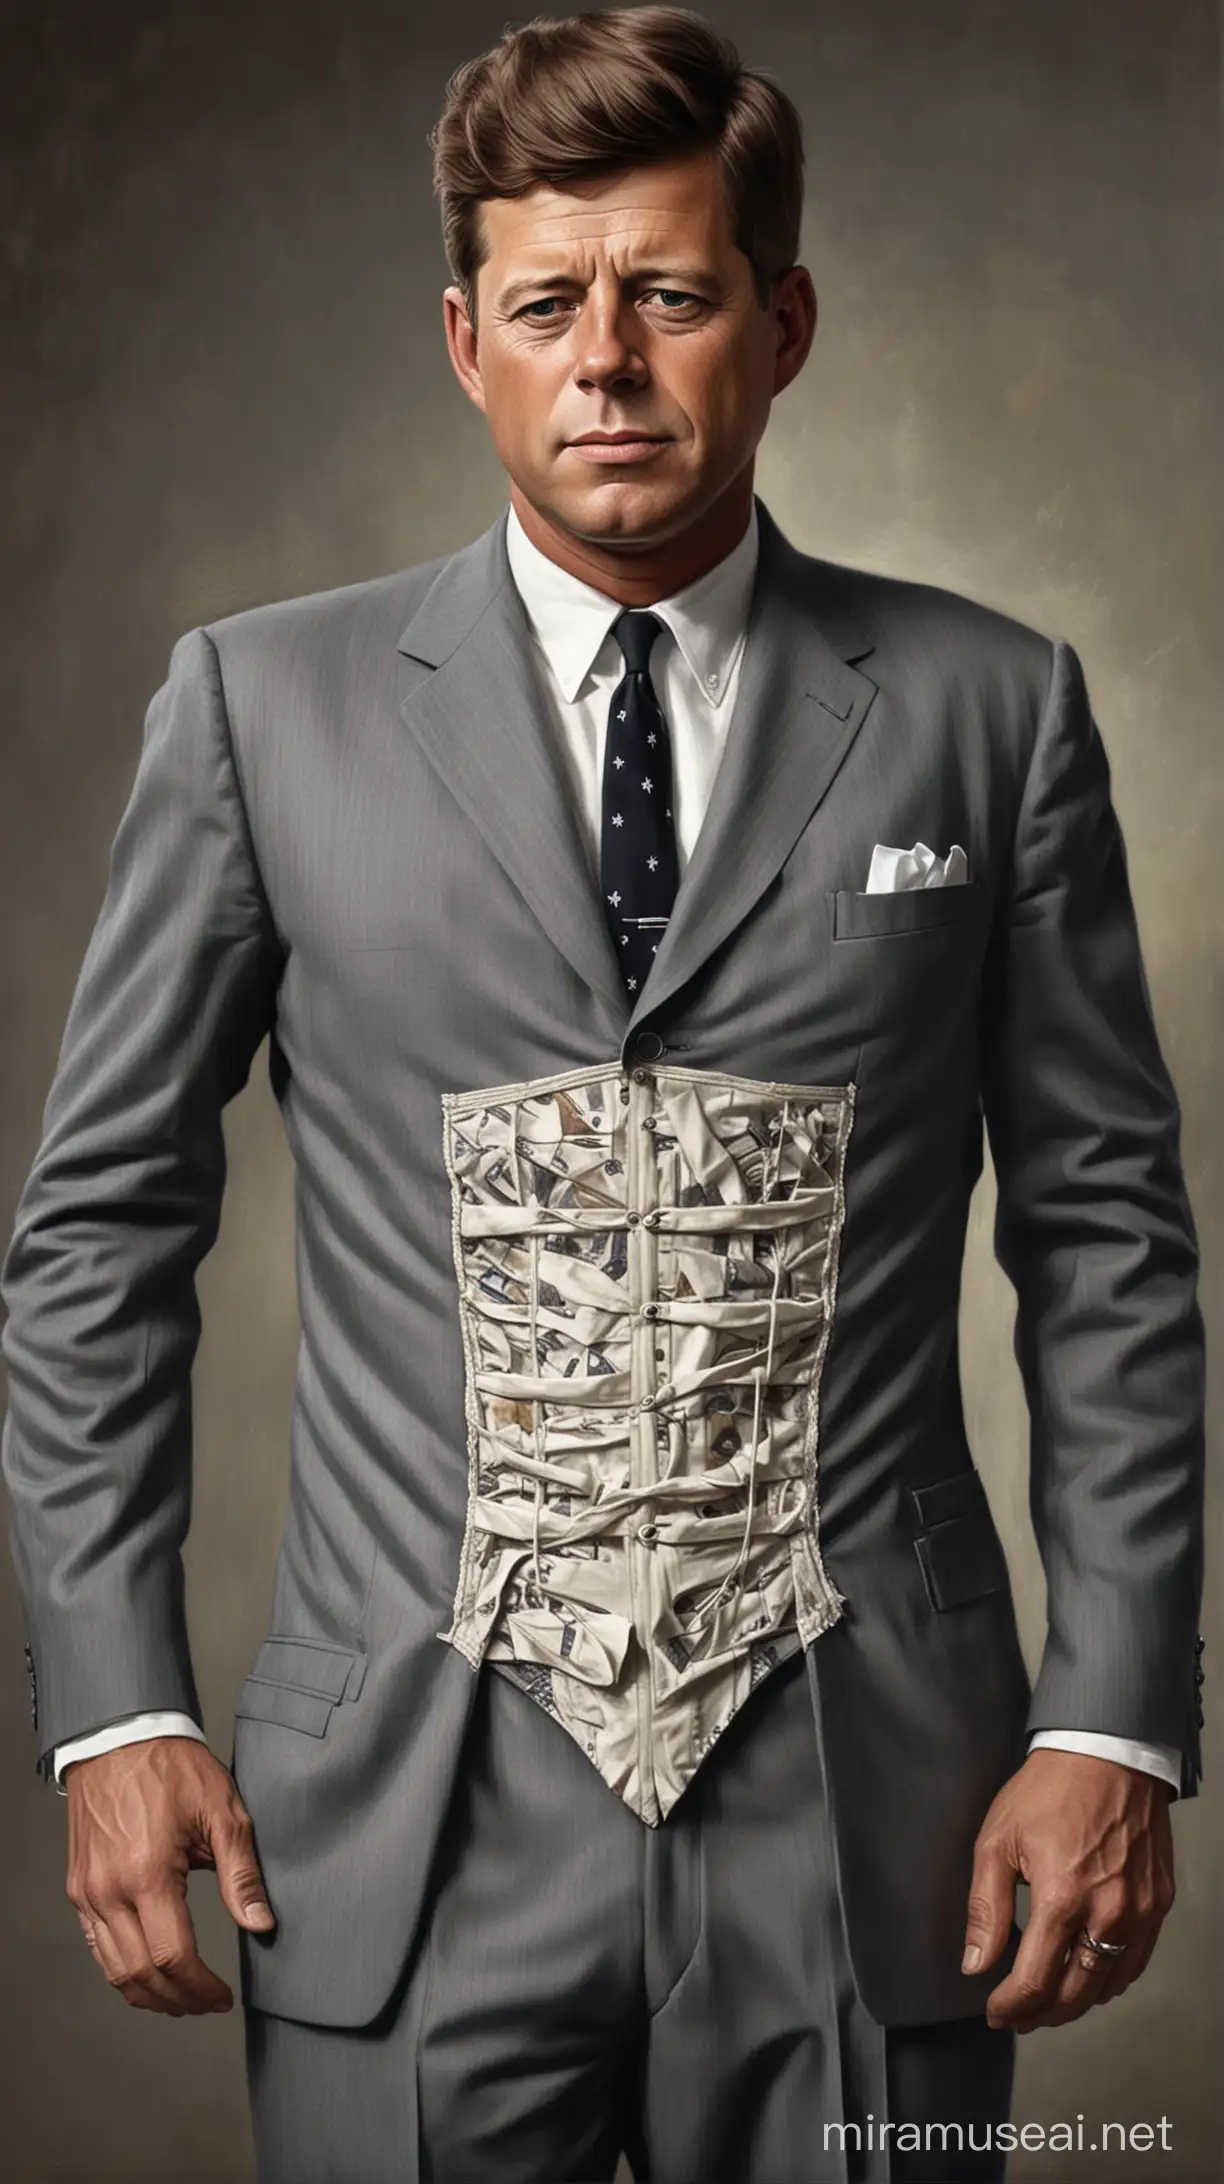 An artistic representation of JFK wearing a hidden corset under his suit, showcasing the burden of his back pain and its potential impact on his tragic end.
